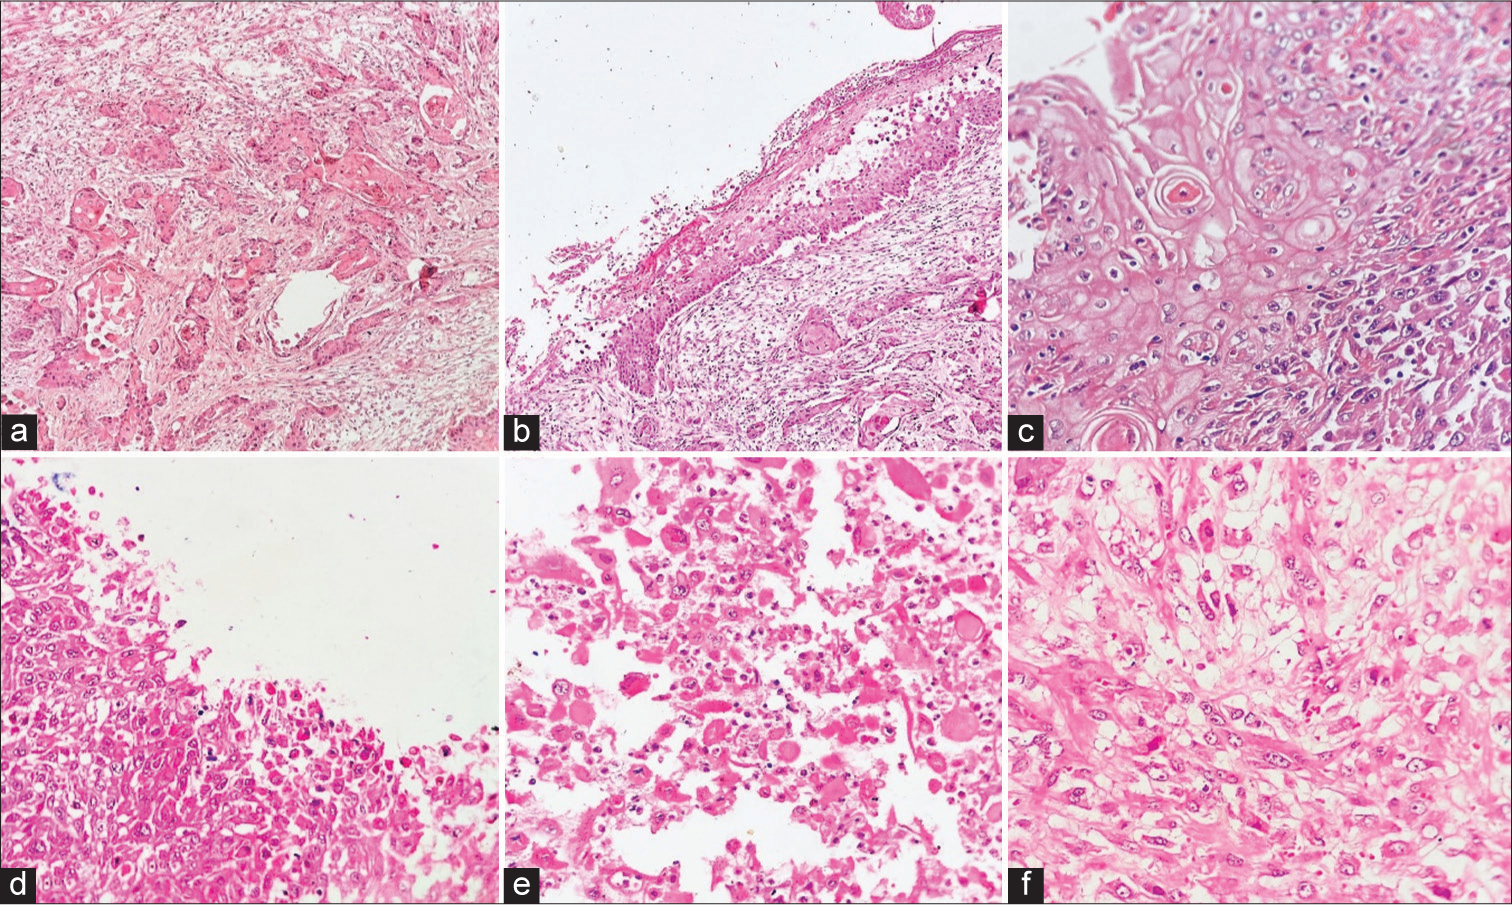 (a) Malignant tumor showing nests of squamoid cells, displaying an infiltrative growth pattern. Tumor nests and islands showing intercellular bridges and keratin pearl formation (HE ×40), (b and c) individual cells showing hyperchromasia, irregular nuclear membrane, and dense eosinophilic cytoplasm (HE ×40, ×100), and (d-f) malignant squamous cells appeared round to oval (acantholytic cells) and dyscohesive in nature, scattered throughout the tumor substance (HE ×100, ×200, ×400). HE: hematoxylin and eosin.